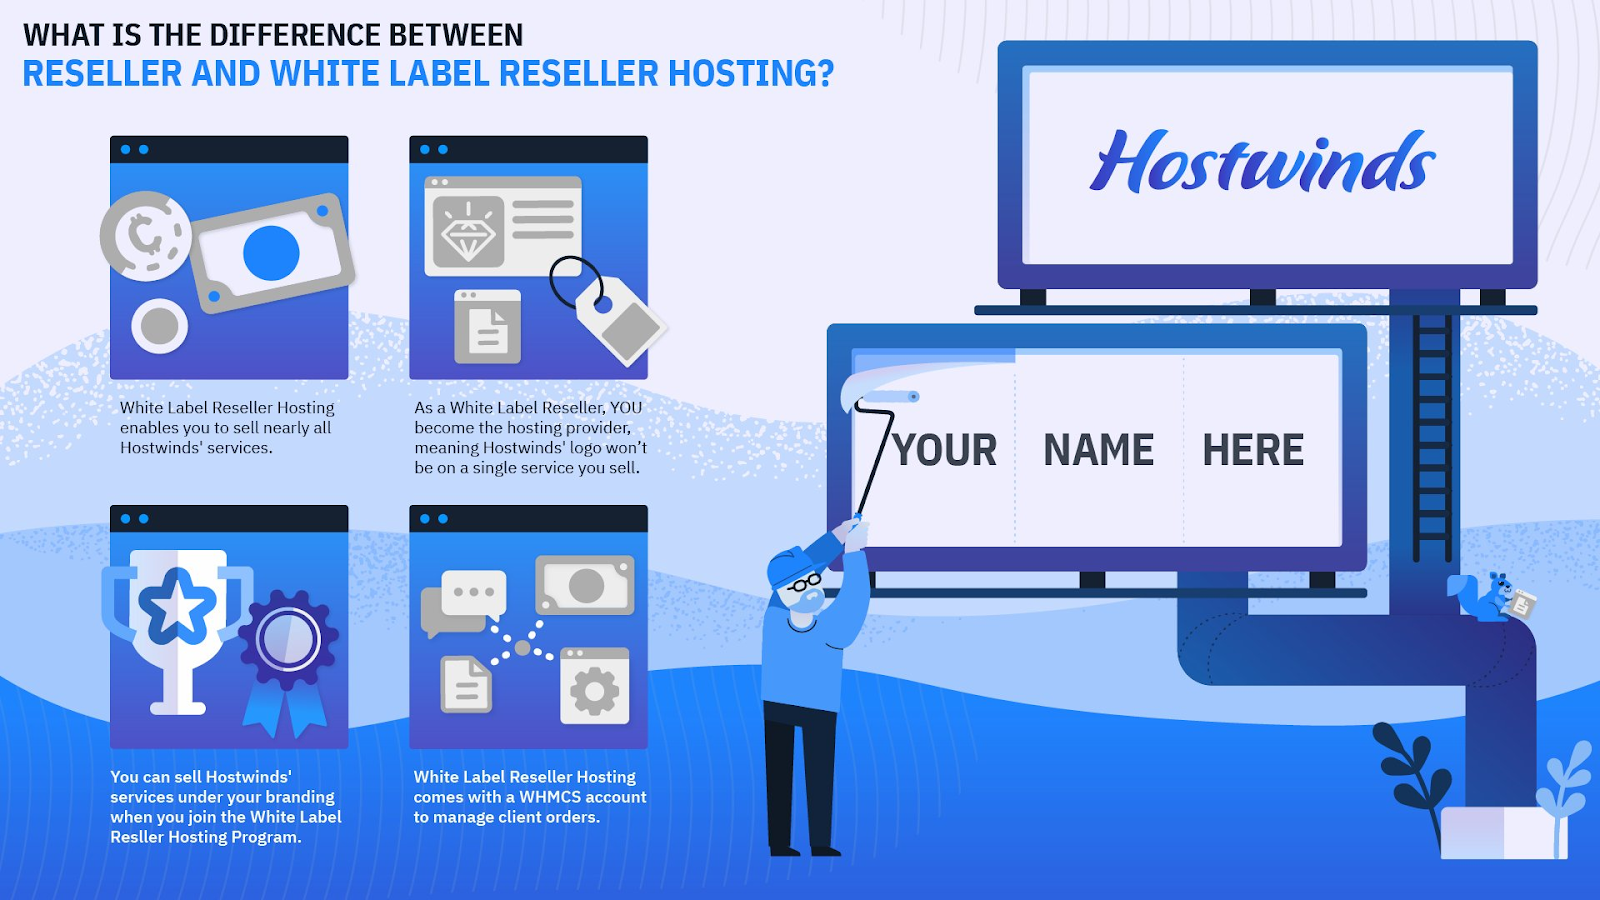 Hostwinds Features and Benefits